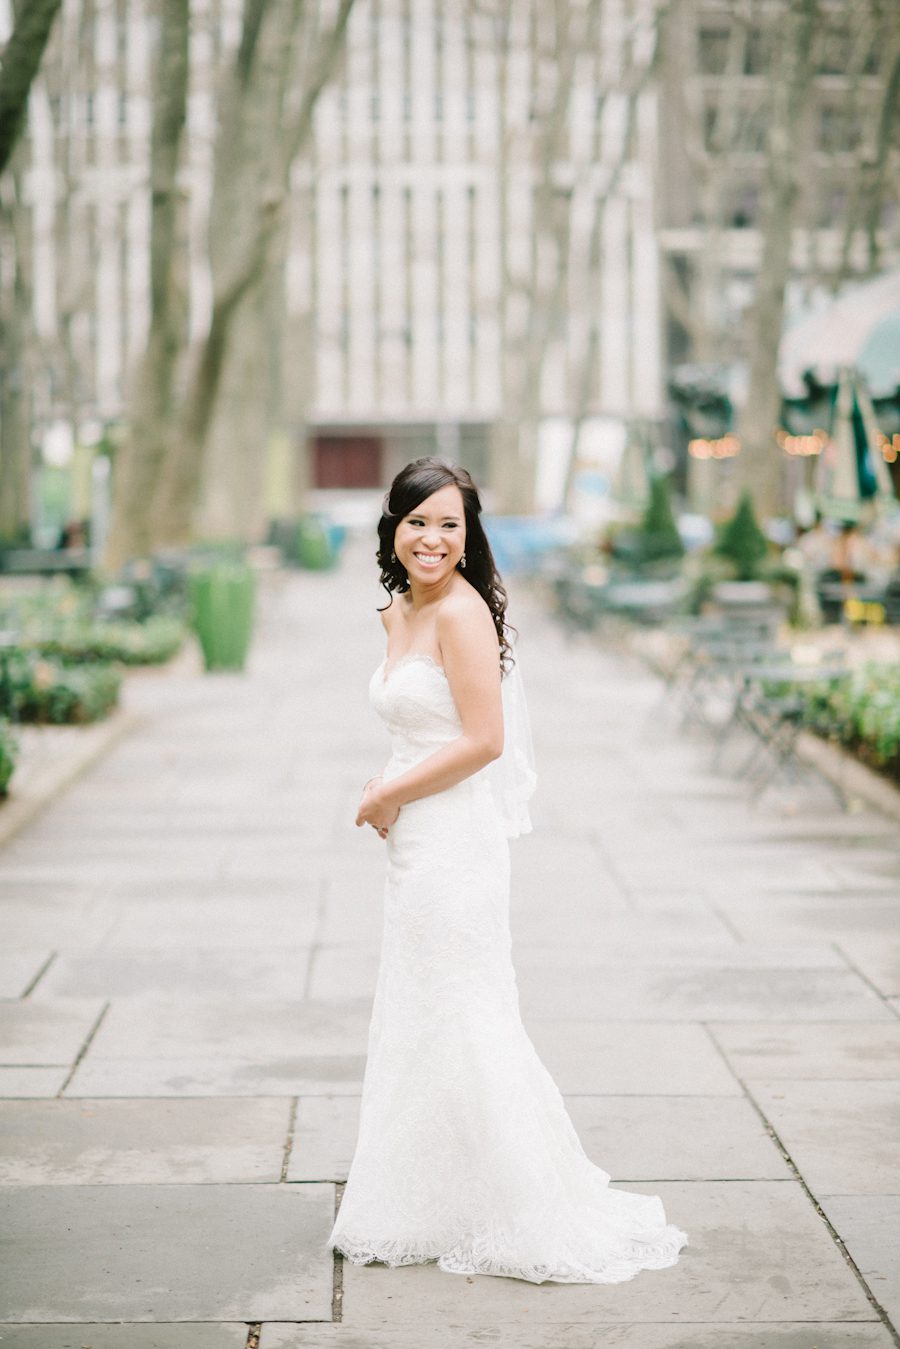 Bride poses for portraits at Bryant Park. Captured by NYC wedding photographer Ben Lau.